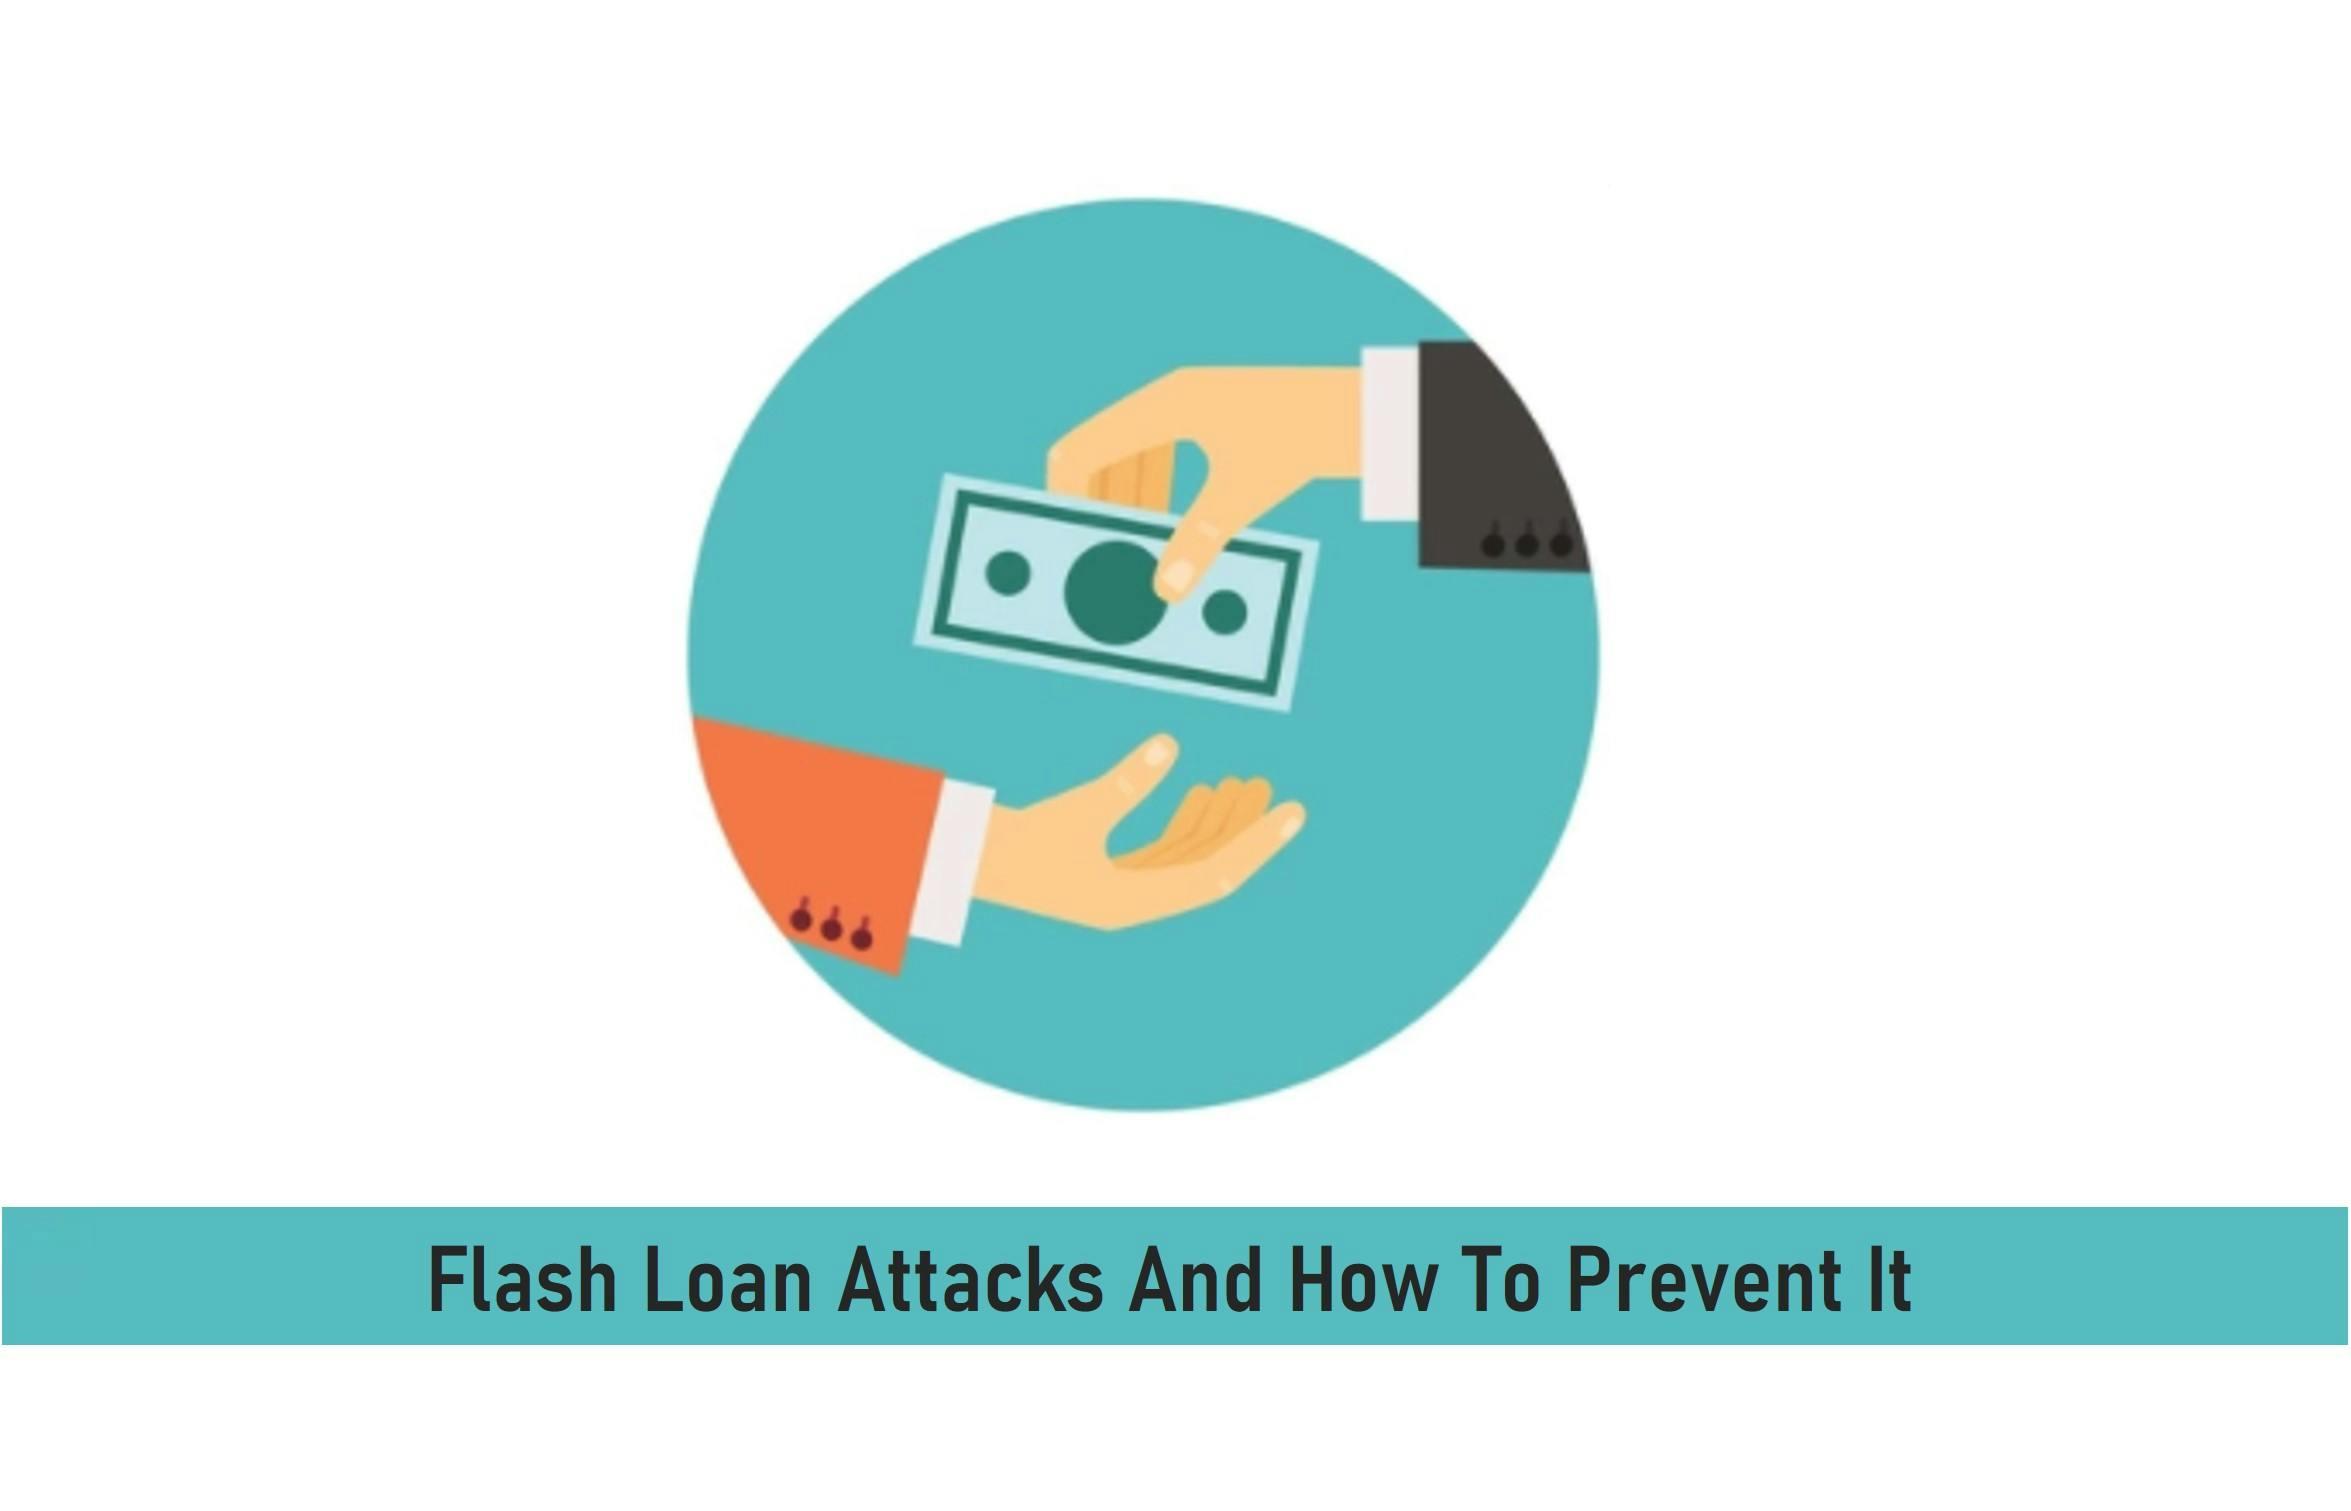 Flash Loan Attacks And How To Prevent It